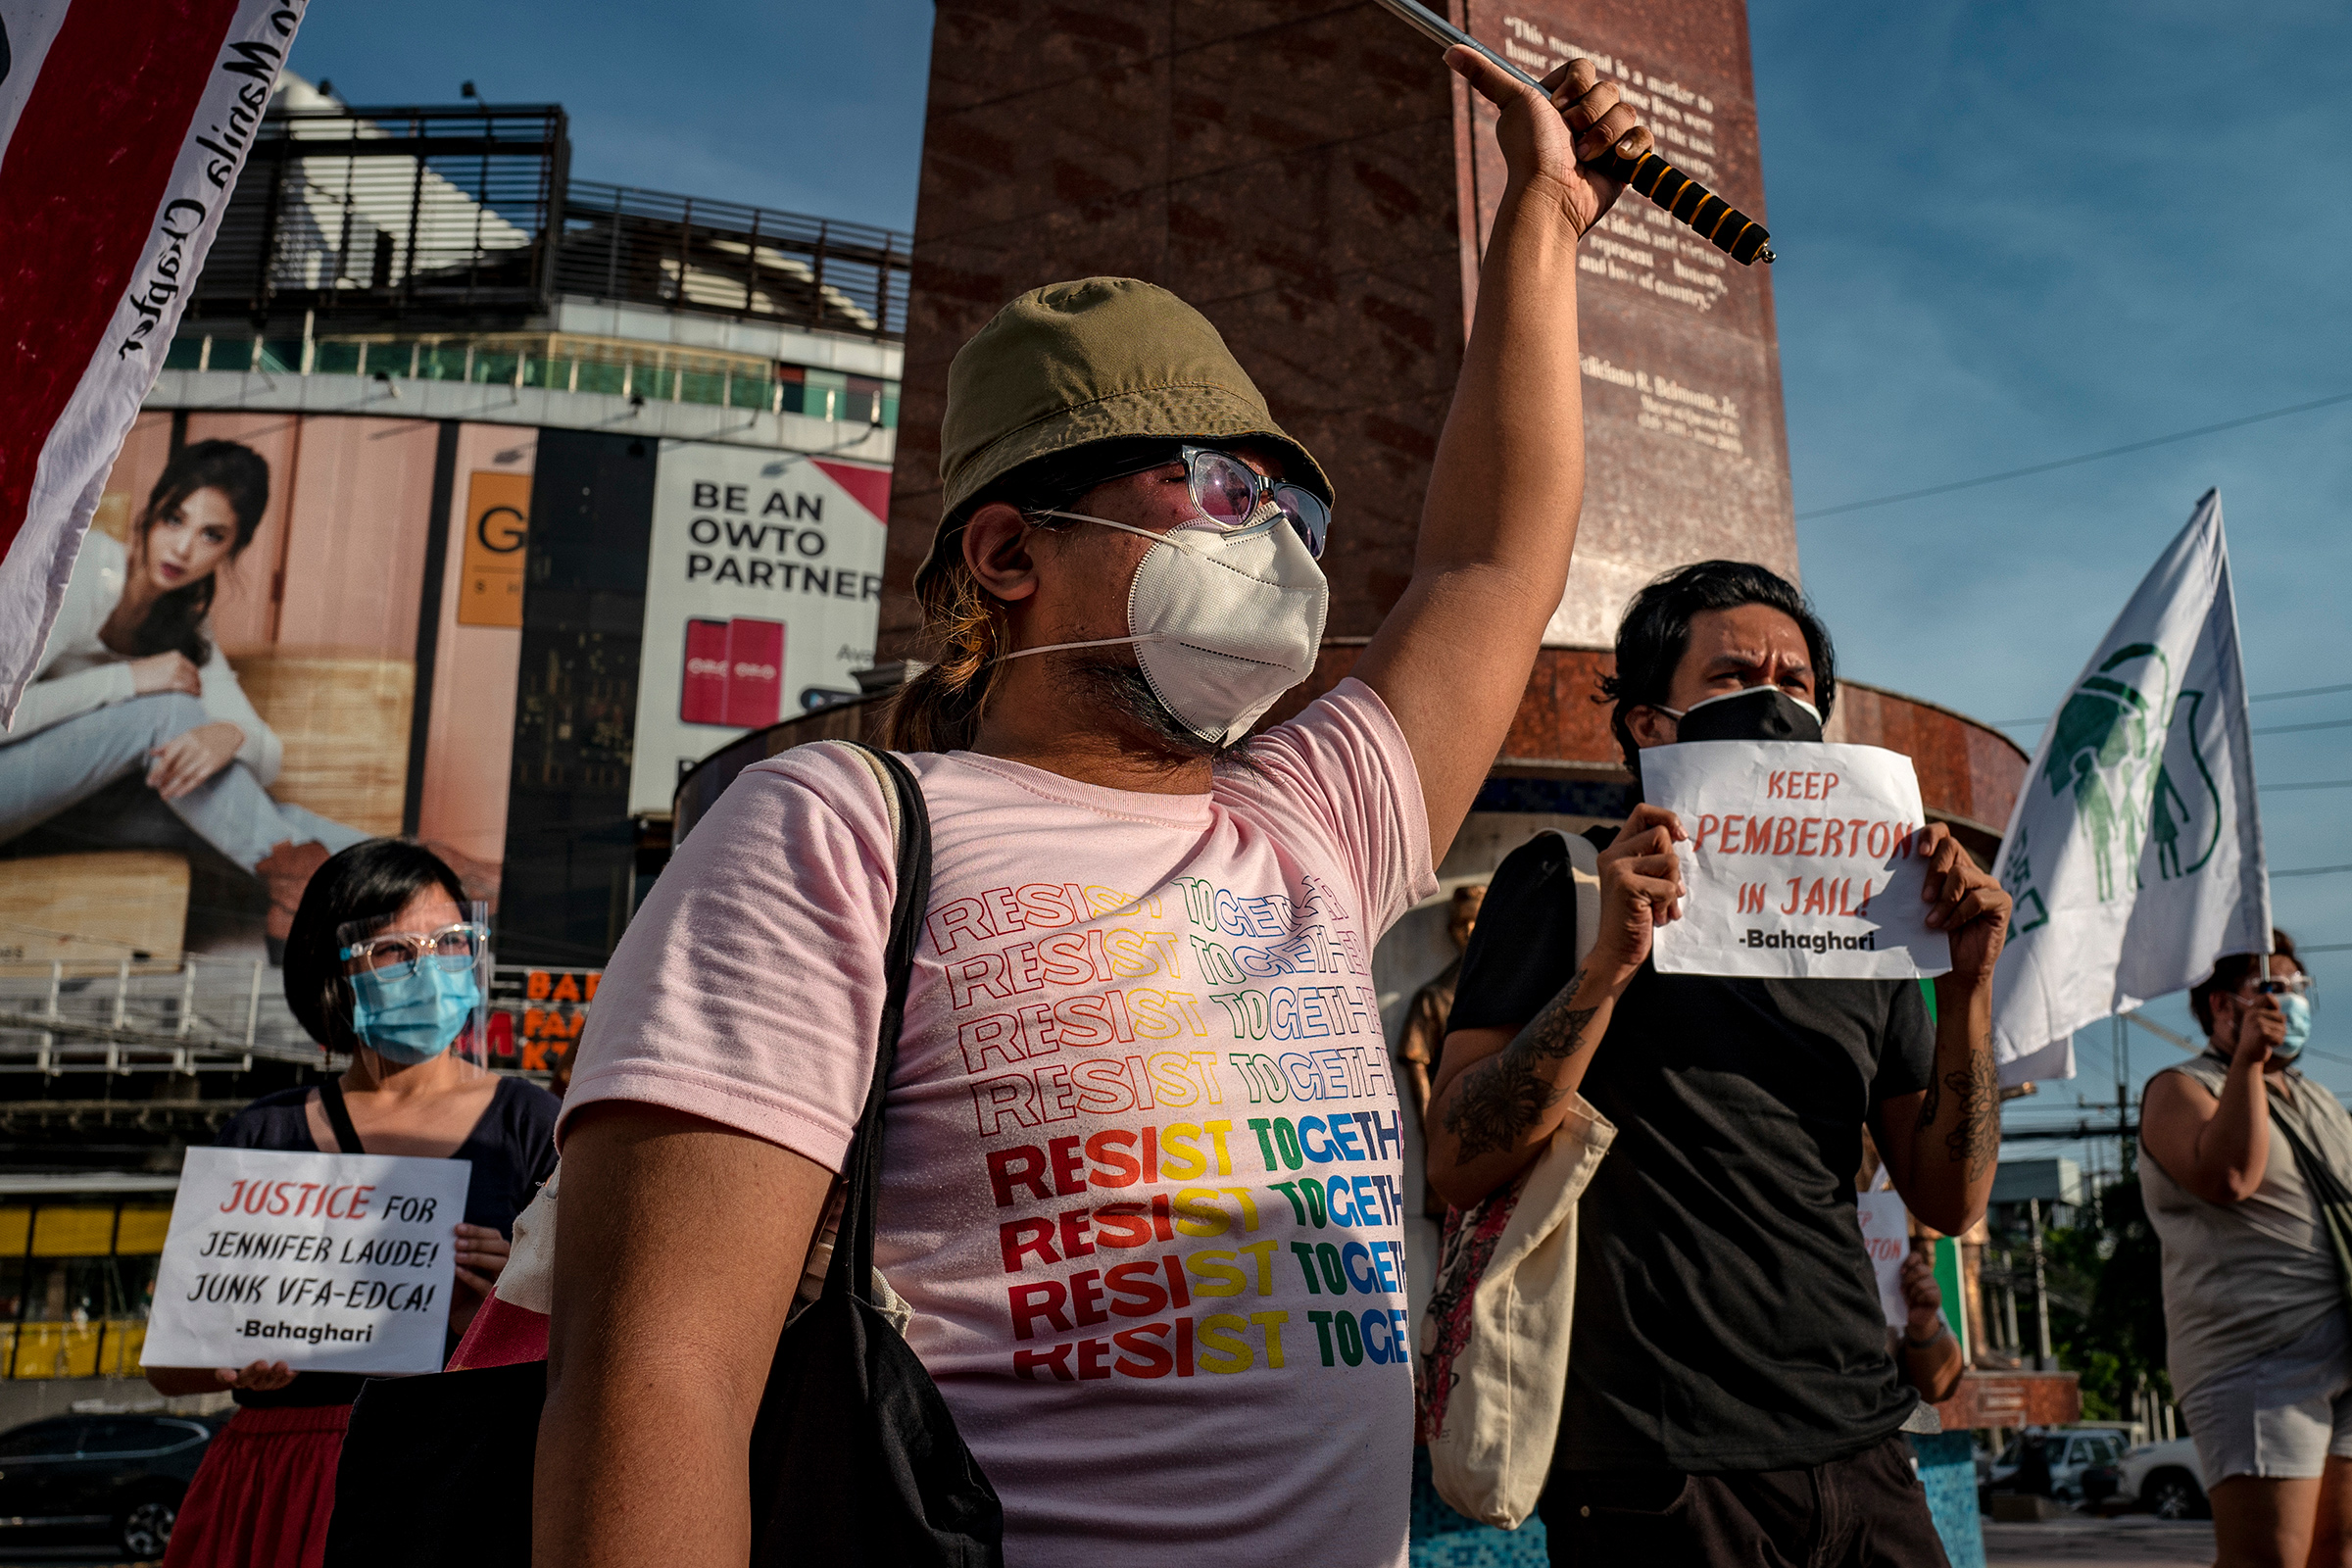 People protest a pardon granted to a U.S. marine who was convicted in 2014 of killing a Filipino transgender woman, in Quezon City, Sept. 8, 2020. (Ezra Acayan—Getty Images)